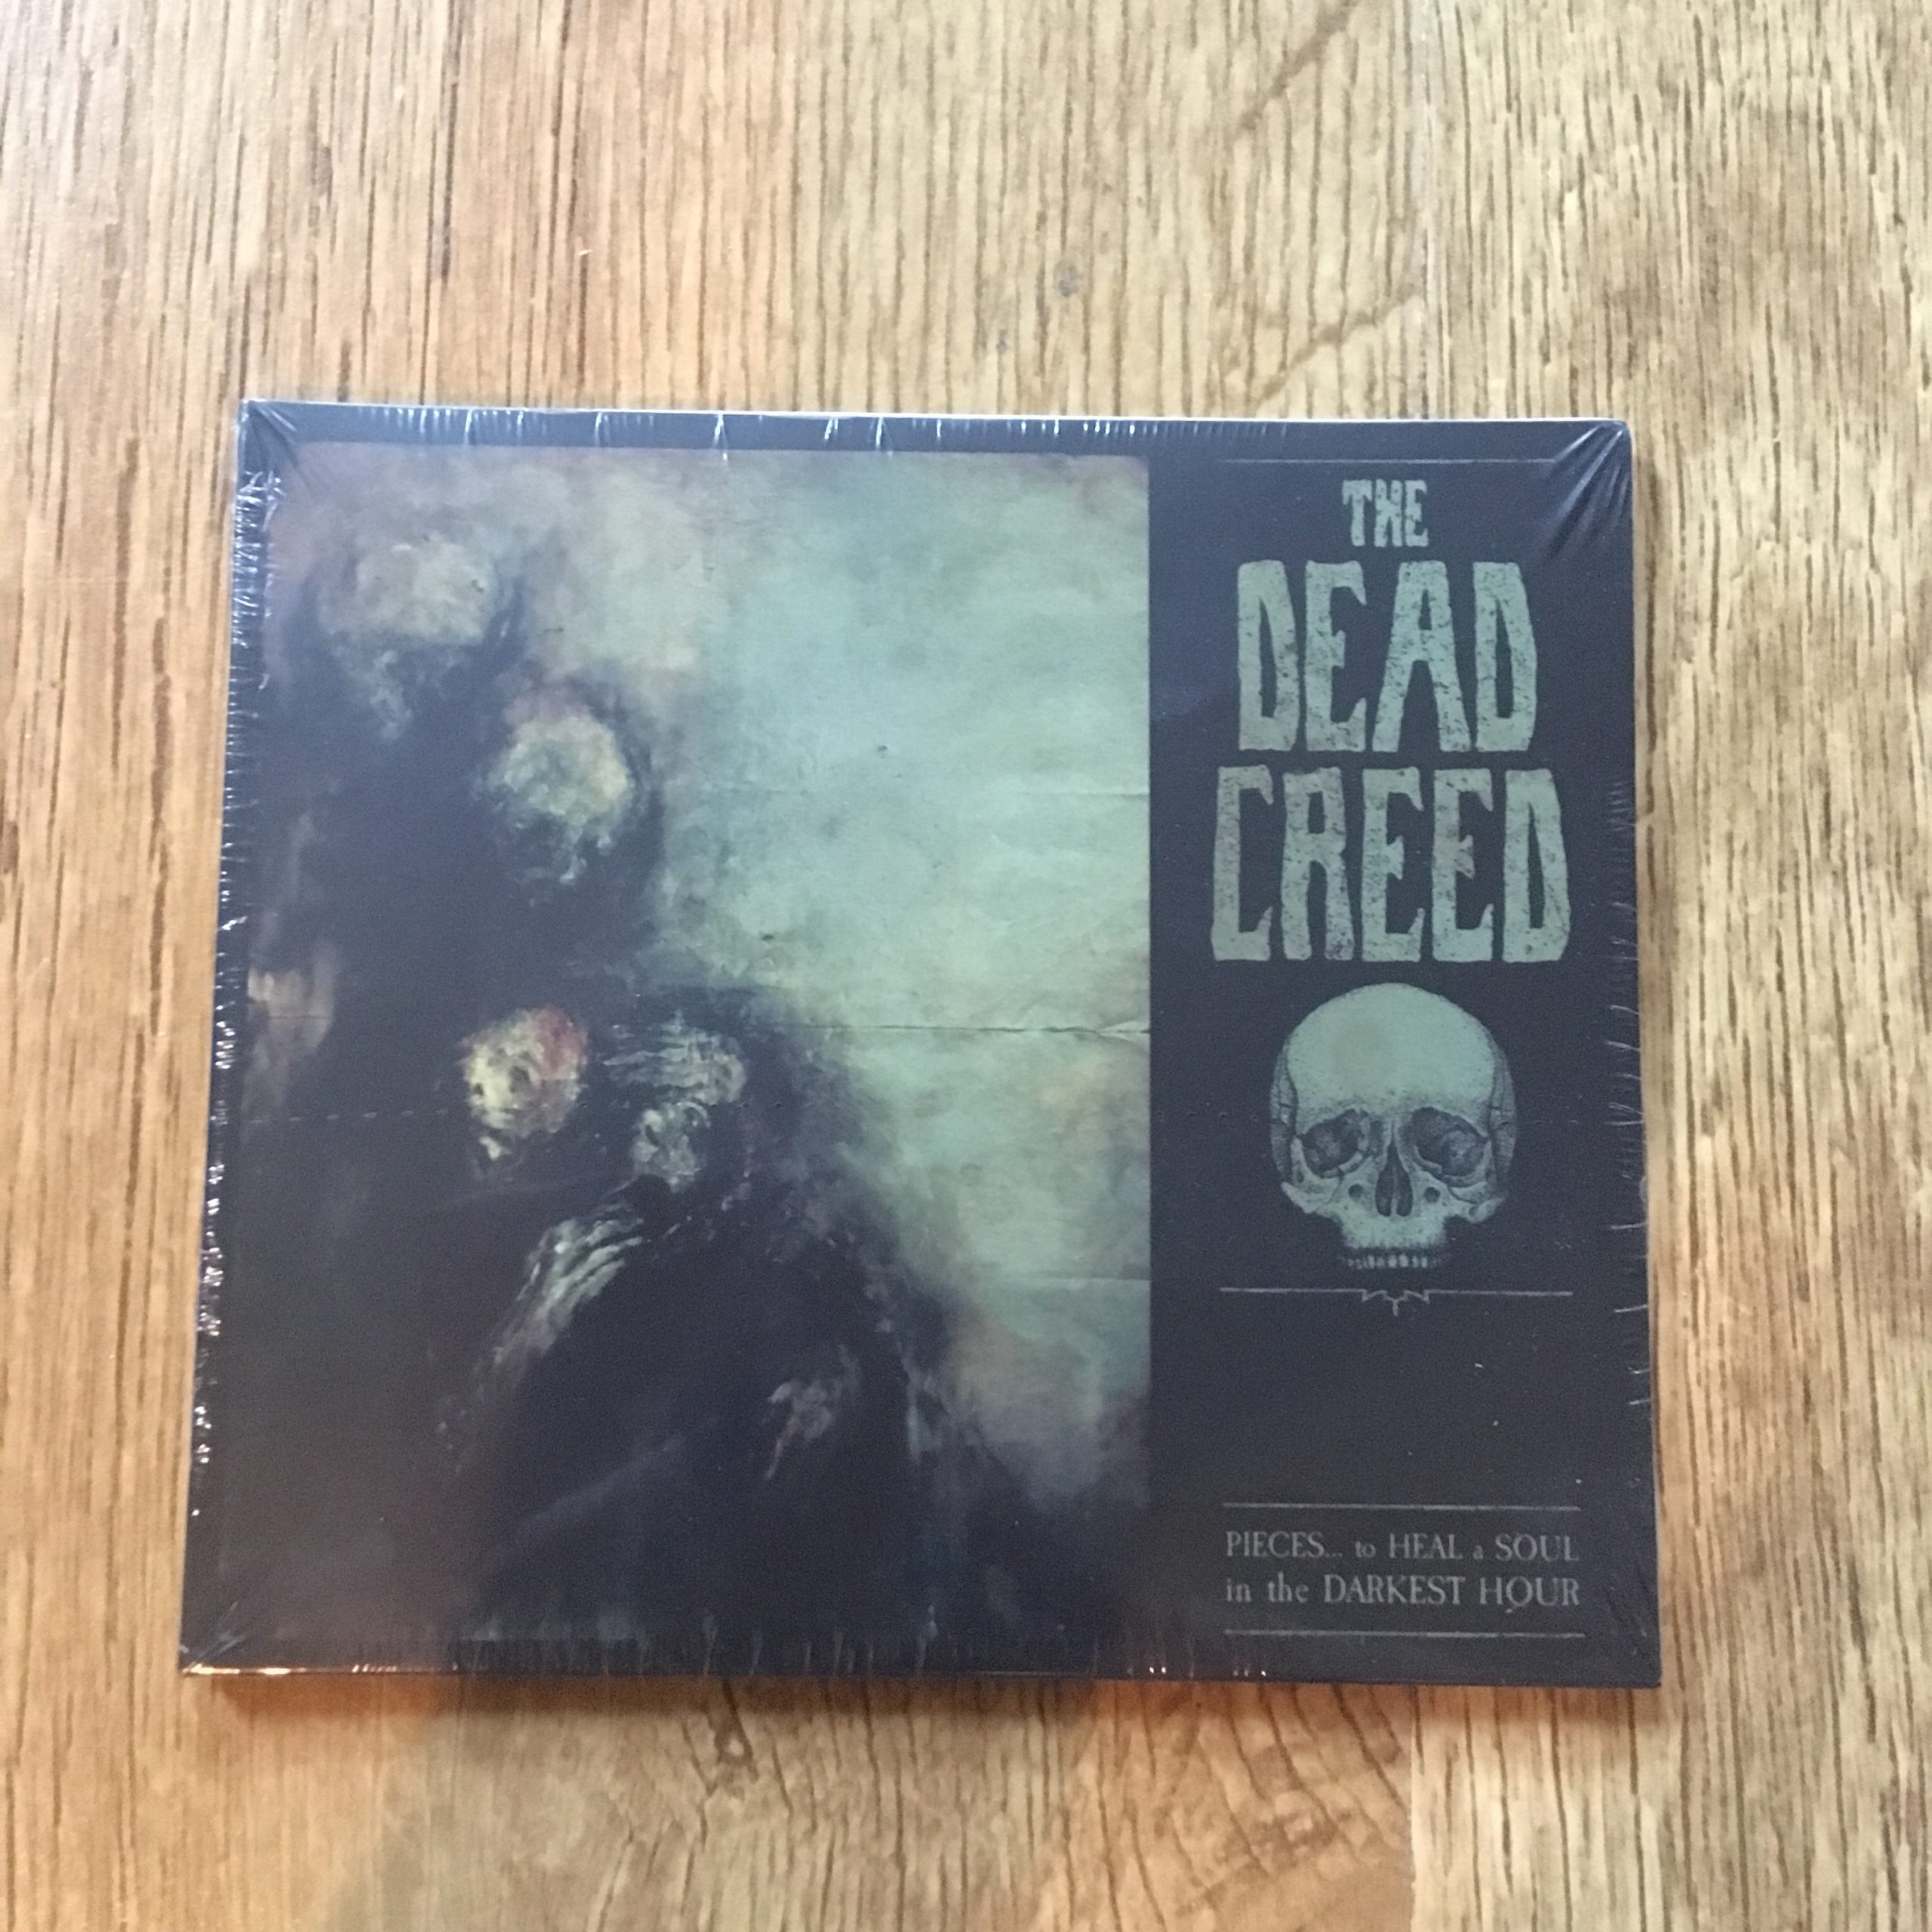 Photo of the The Dead Creed - 'Pieces...' CD